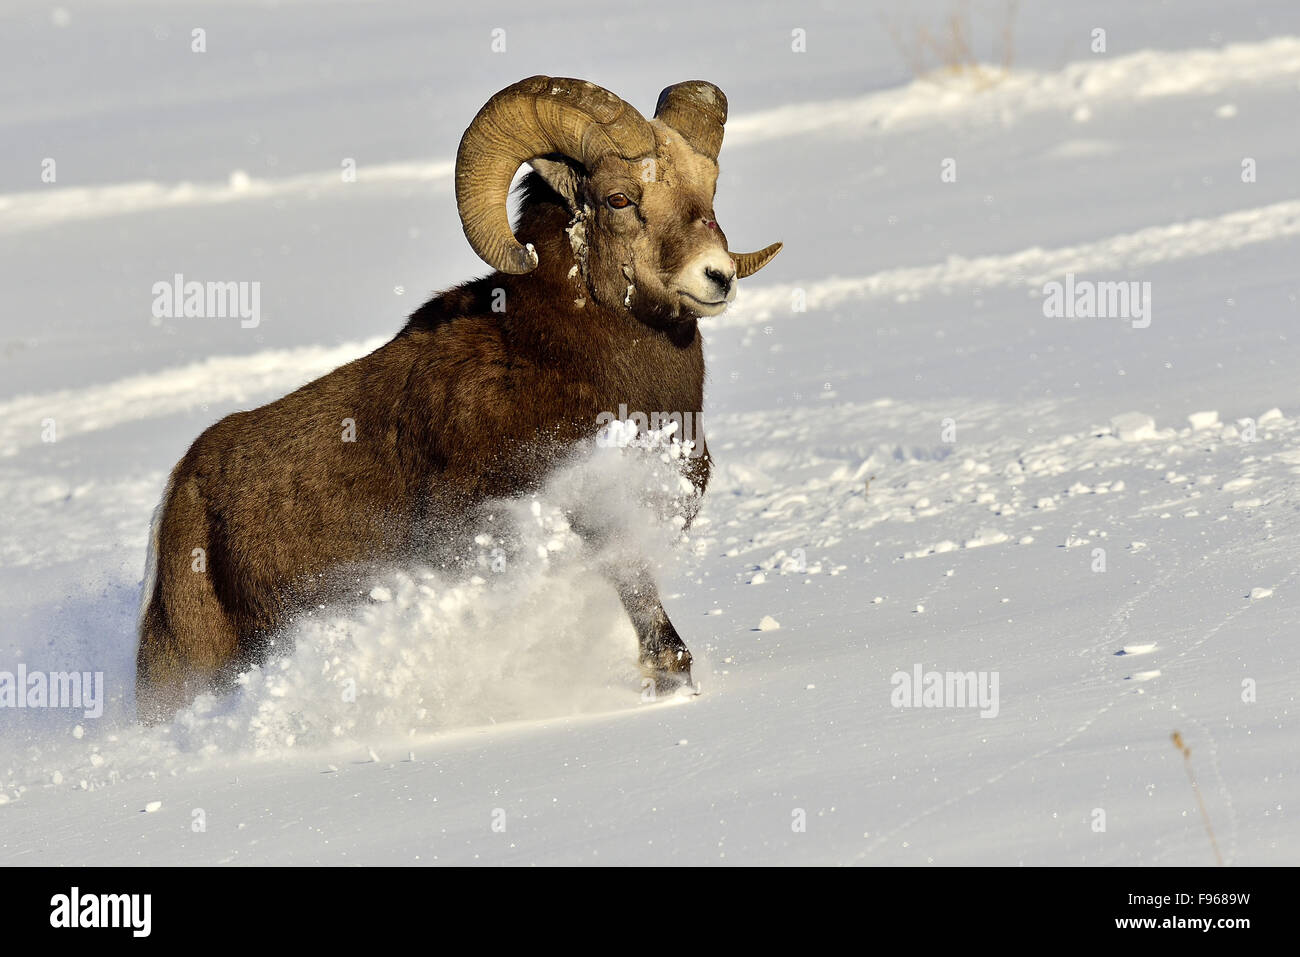 An adult male bighorn sheep  'Orvis canadensis'   running through the deep snow in the rocky mountains of Alberta Canada Stock Photo